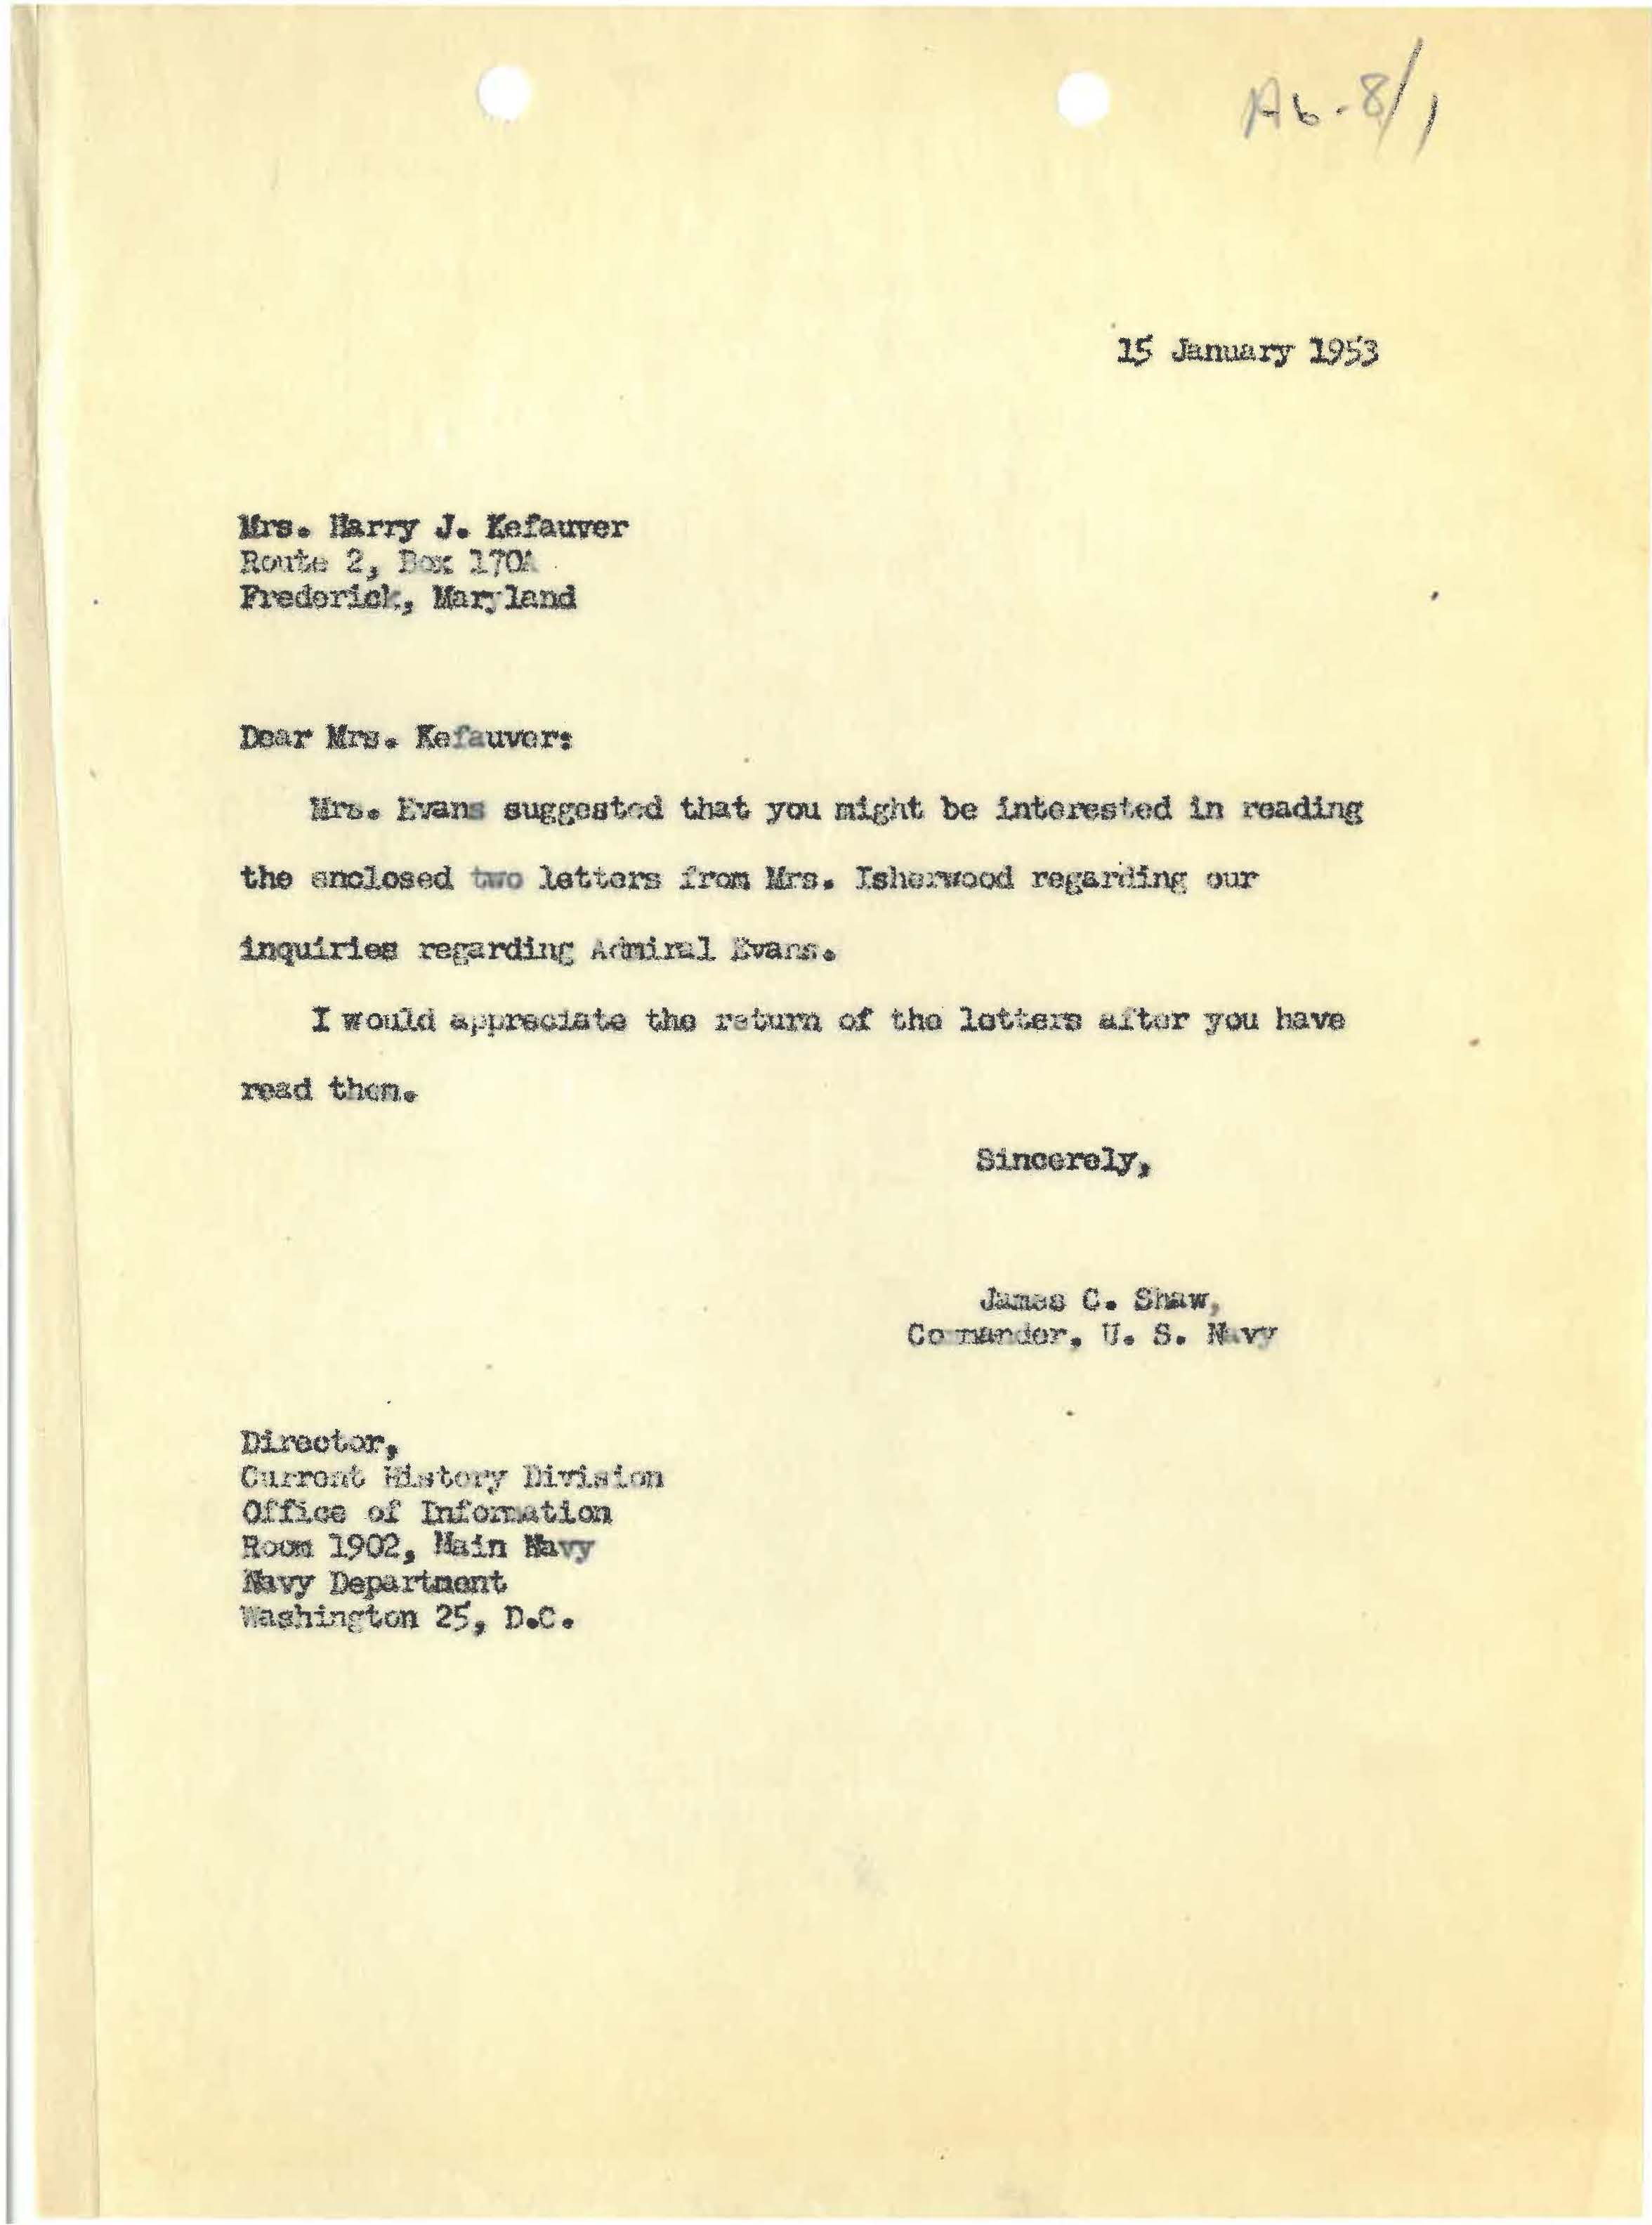 Shaw letter to Miriam Evans Kefauver